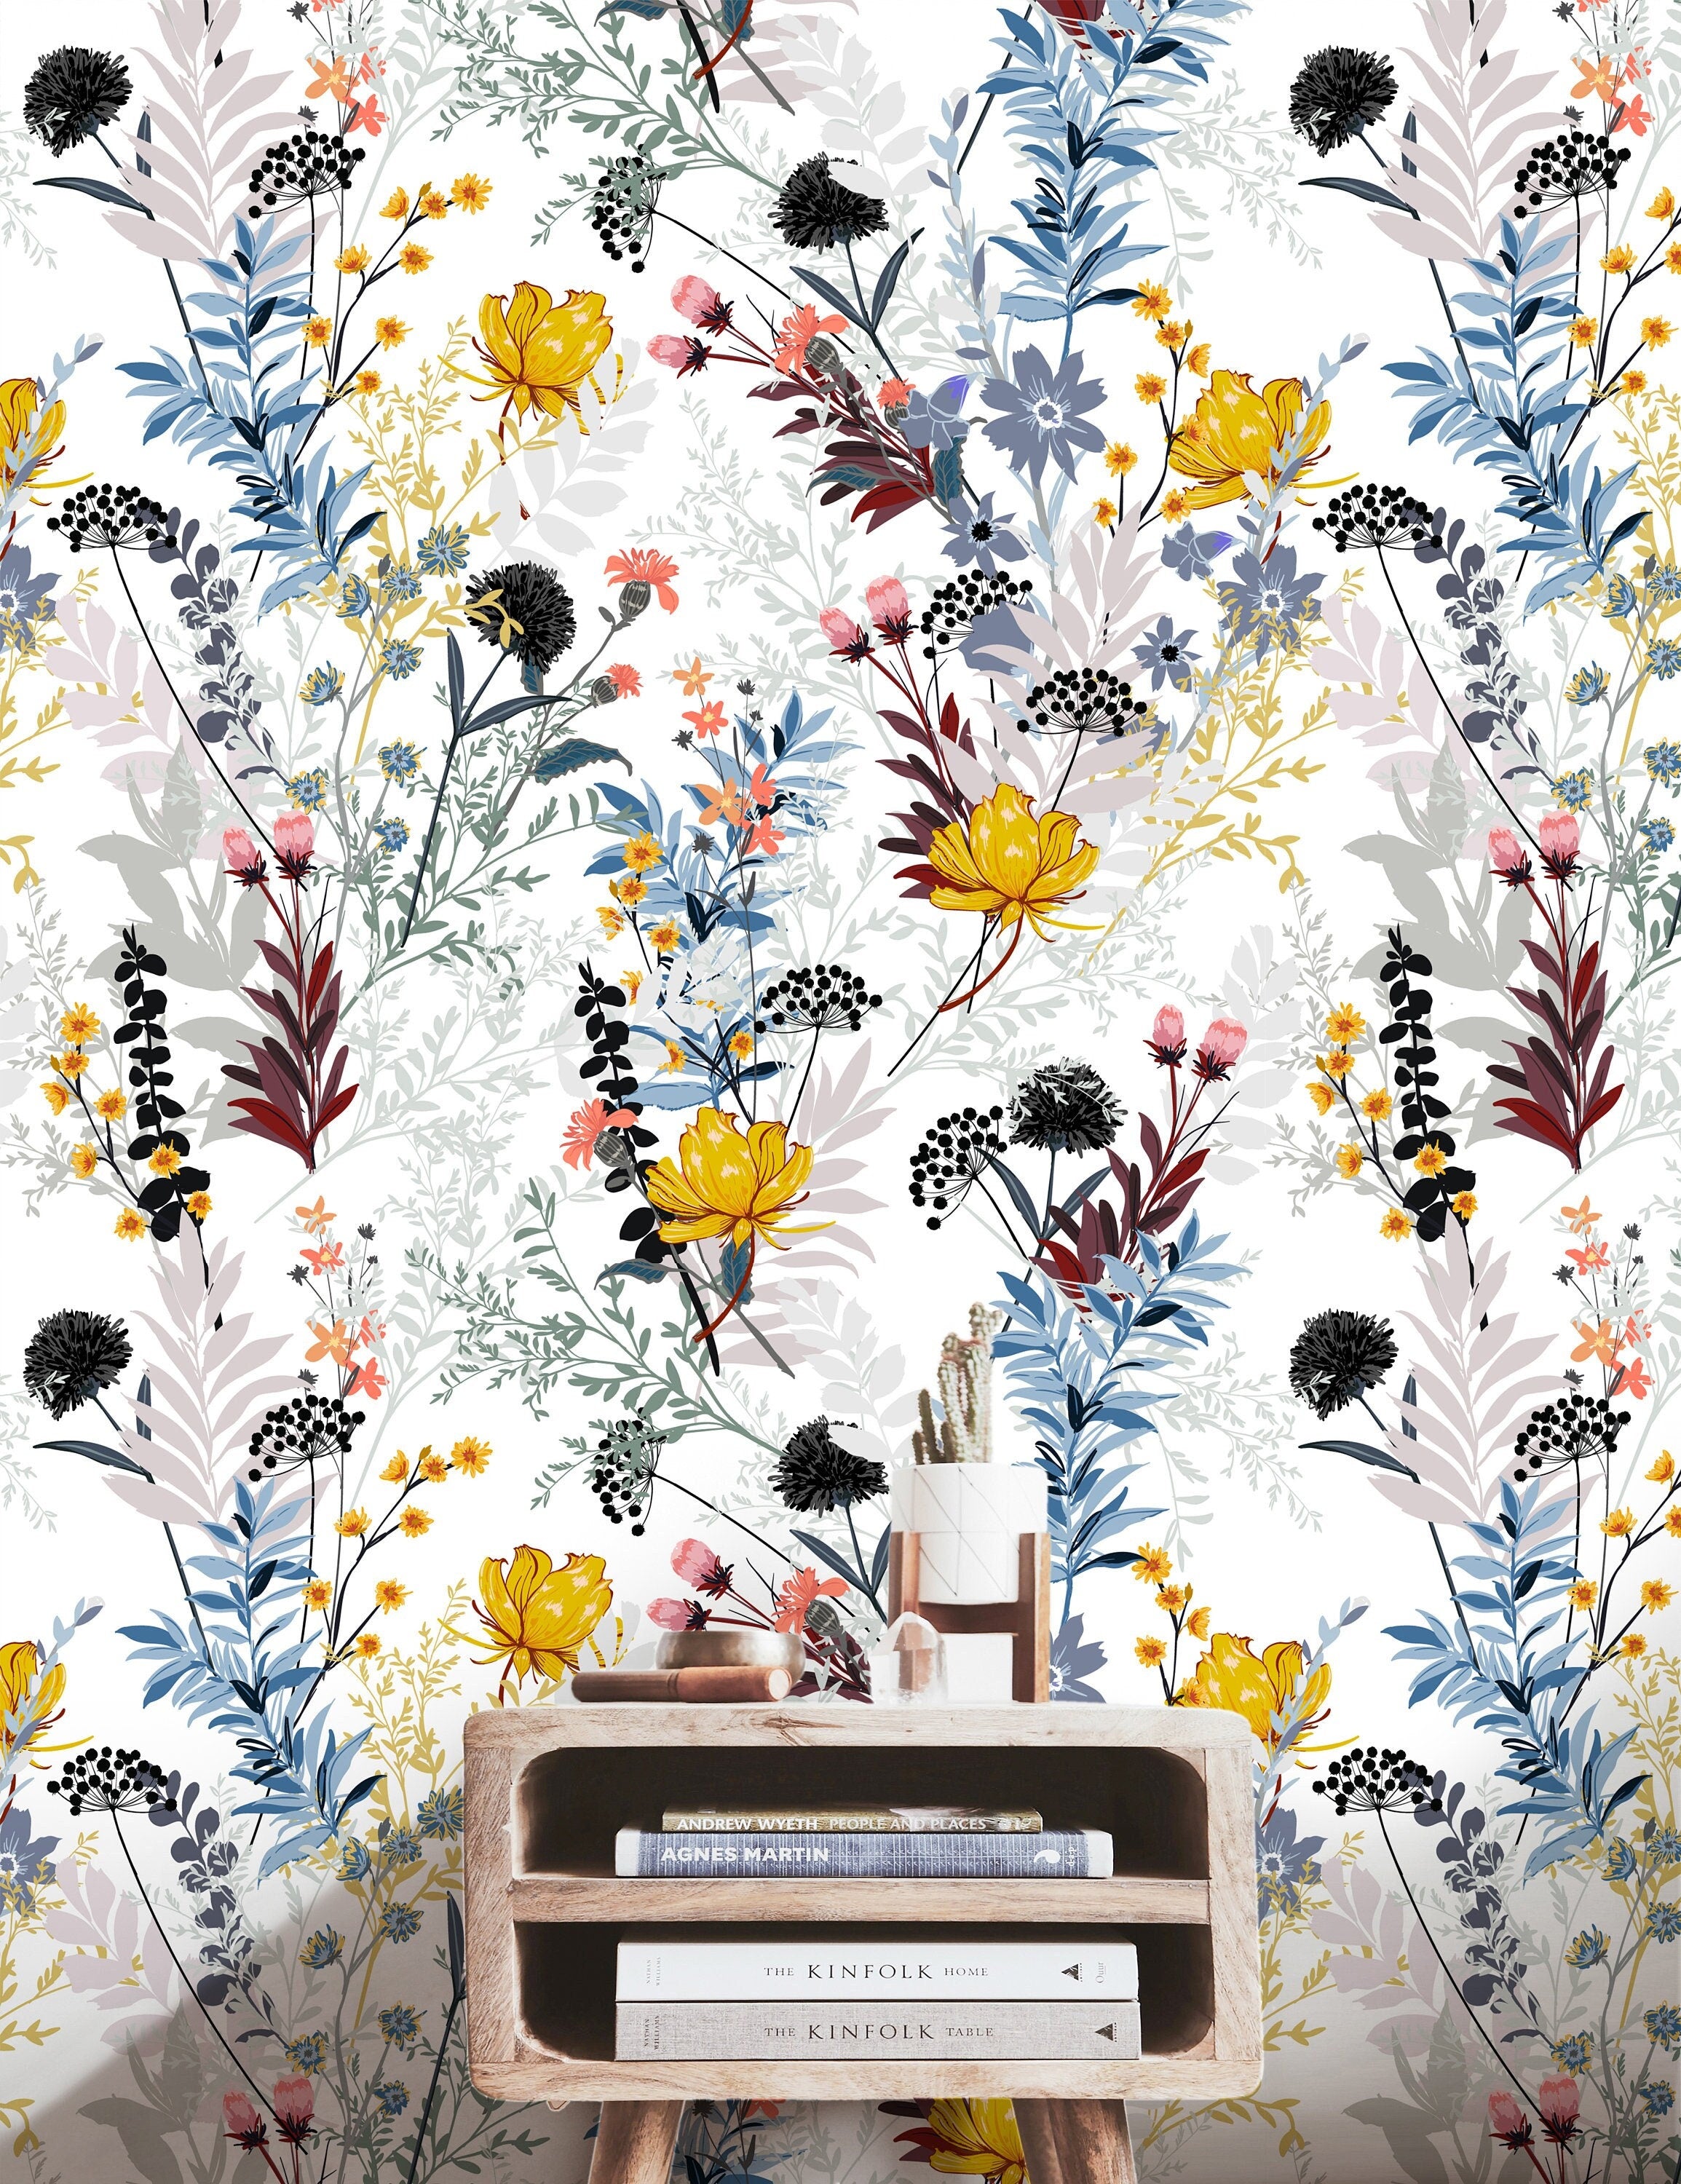 Wallpaper Peel and Stick Wallpaper Colorful Wildflower Floral Removable Wallpaper Wall Decor Home Decor Wall Art Room Decor 3778 - JamesAndColors